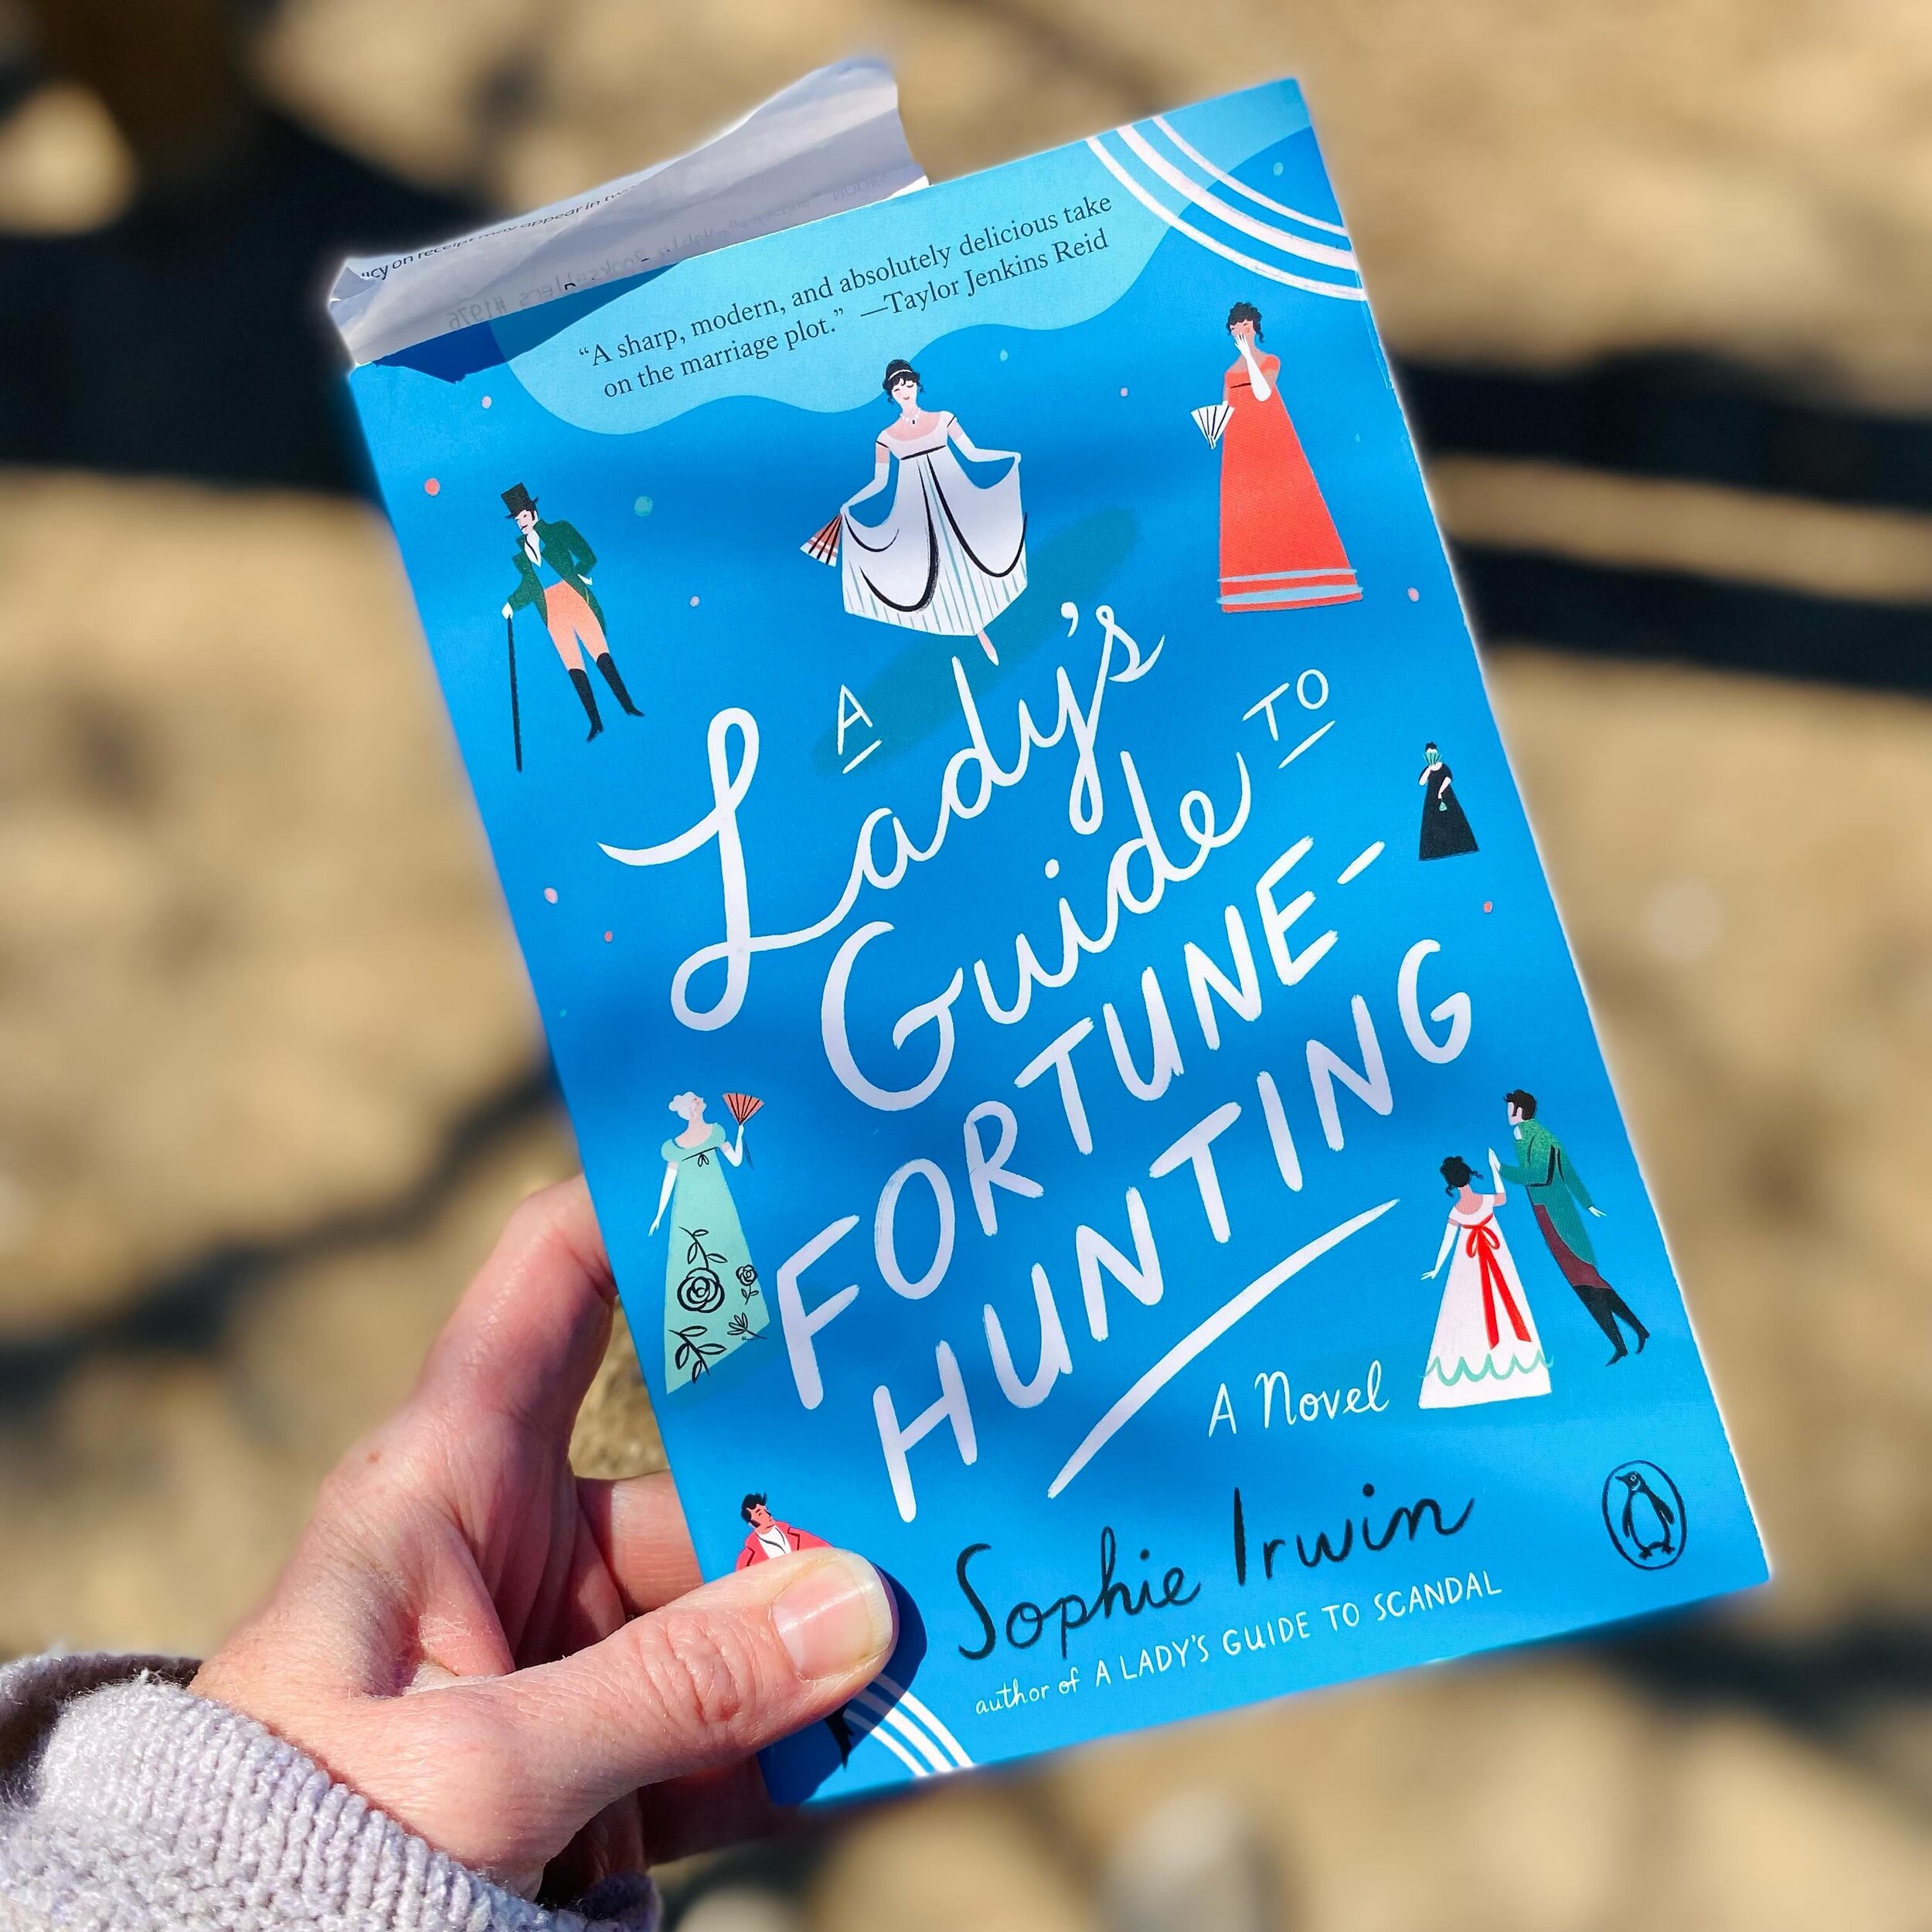 What are people reading these days? This month&rsquo;s book club book for me is A Lady&rsquo;s Guide to Fortune Hunting. I&rsquo;ve been excited to read this one and THEN I saw that @libbyvanderploeg made this beautiful cover so it is now the newest 